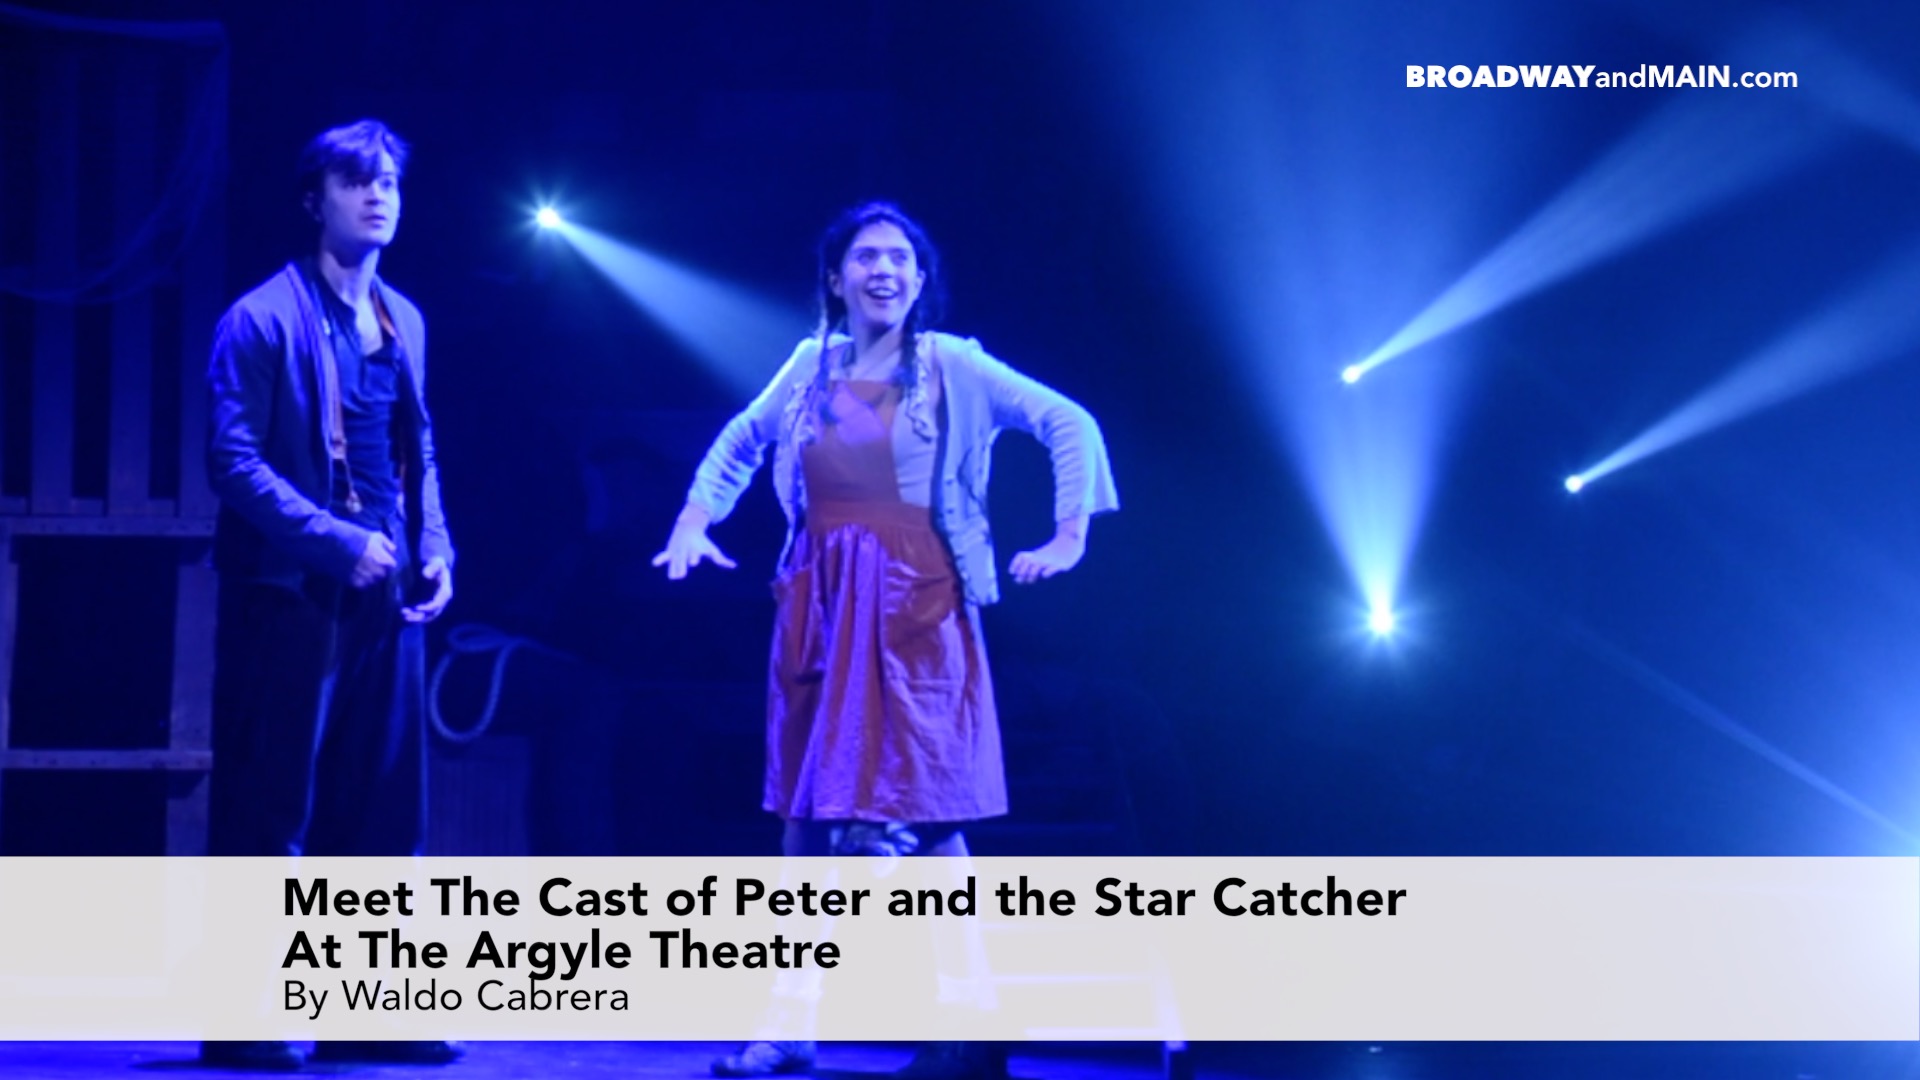 Meet The Cast of Peter and the Star Catcher At The Argyle Theatre